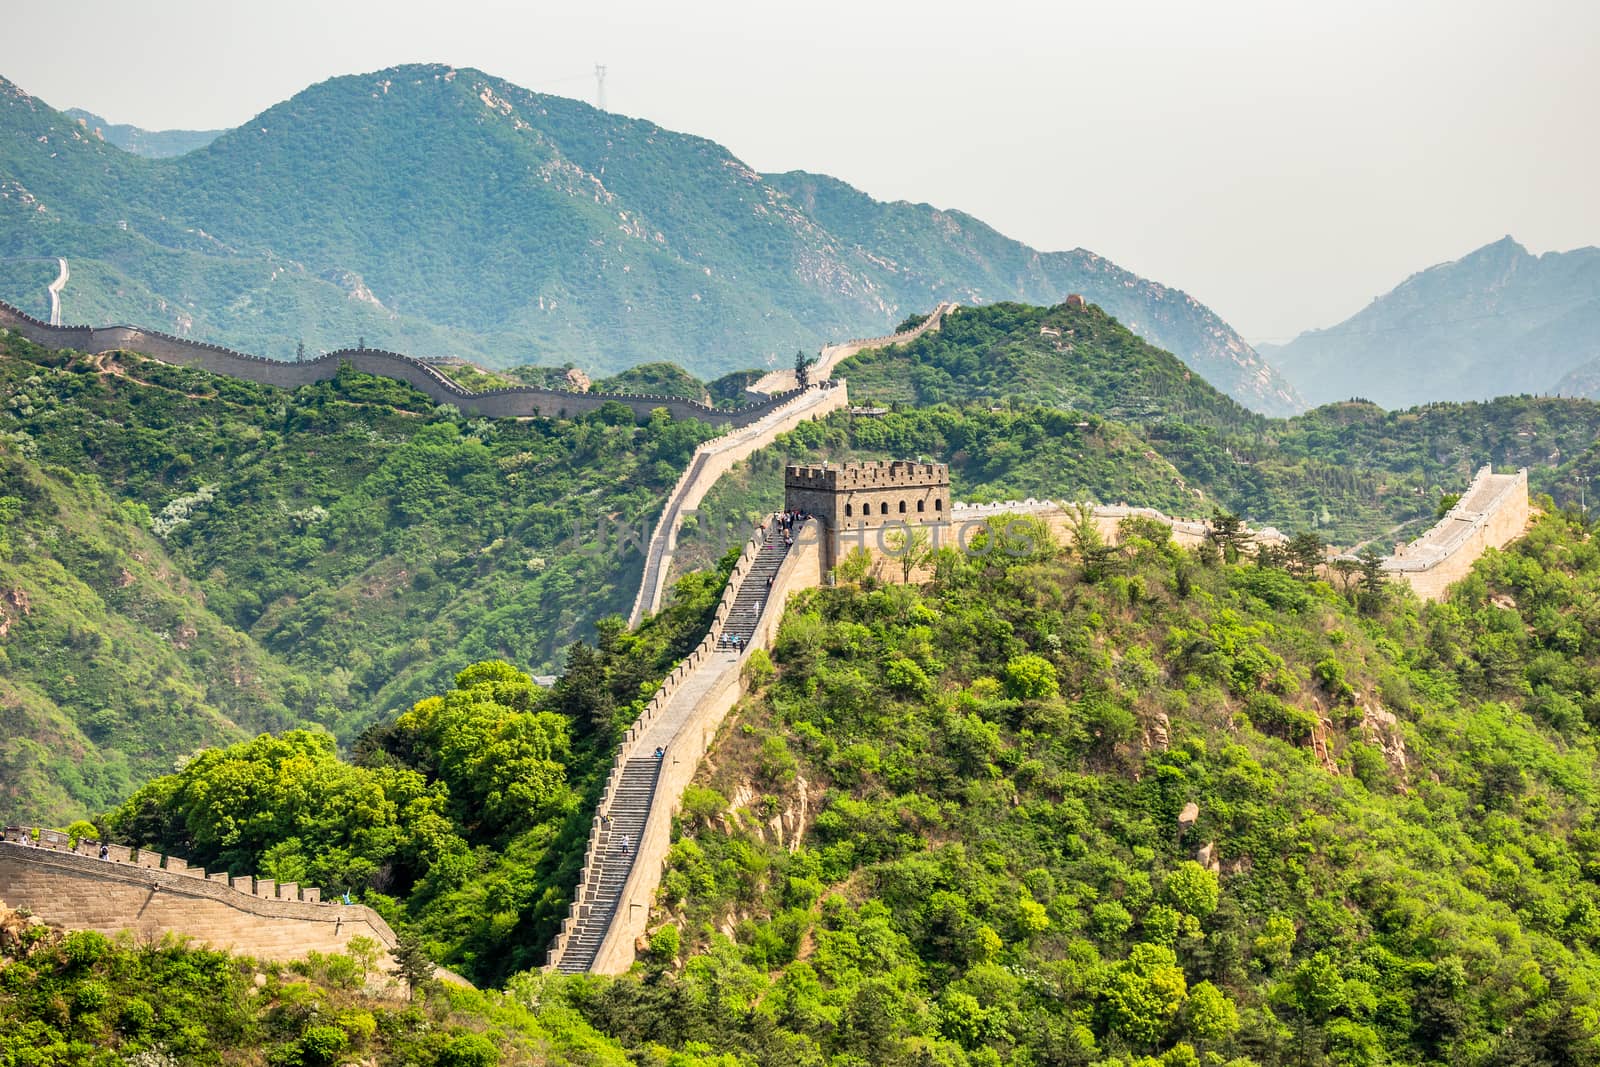 Panorama of Great Wall of China among the green hills and mountains near Beijing, China